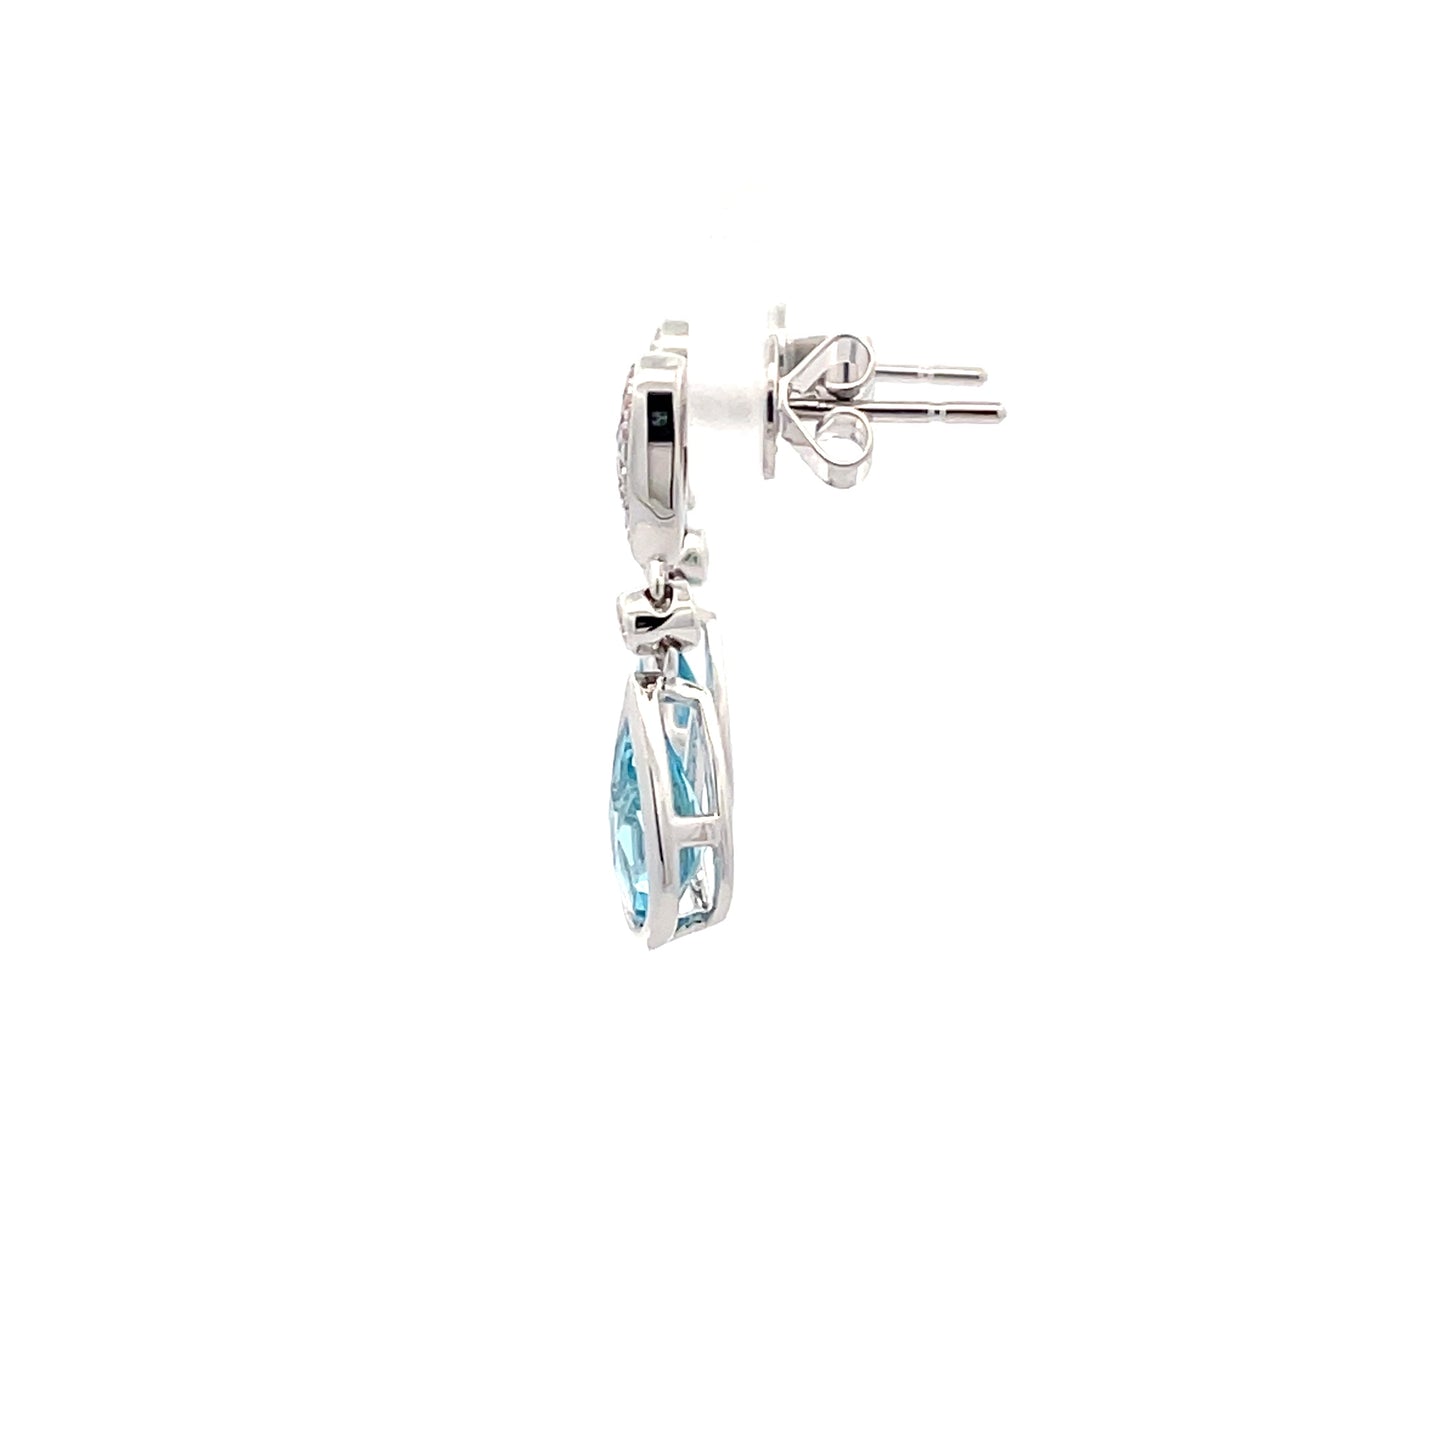 Topaz and Diamond Drop Style Earrings  Gardiner Brothers   